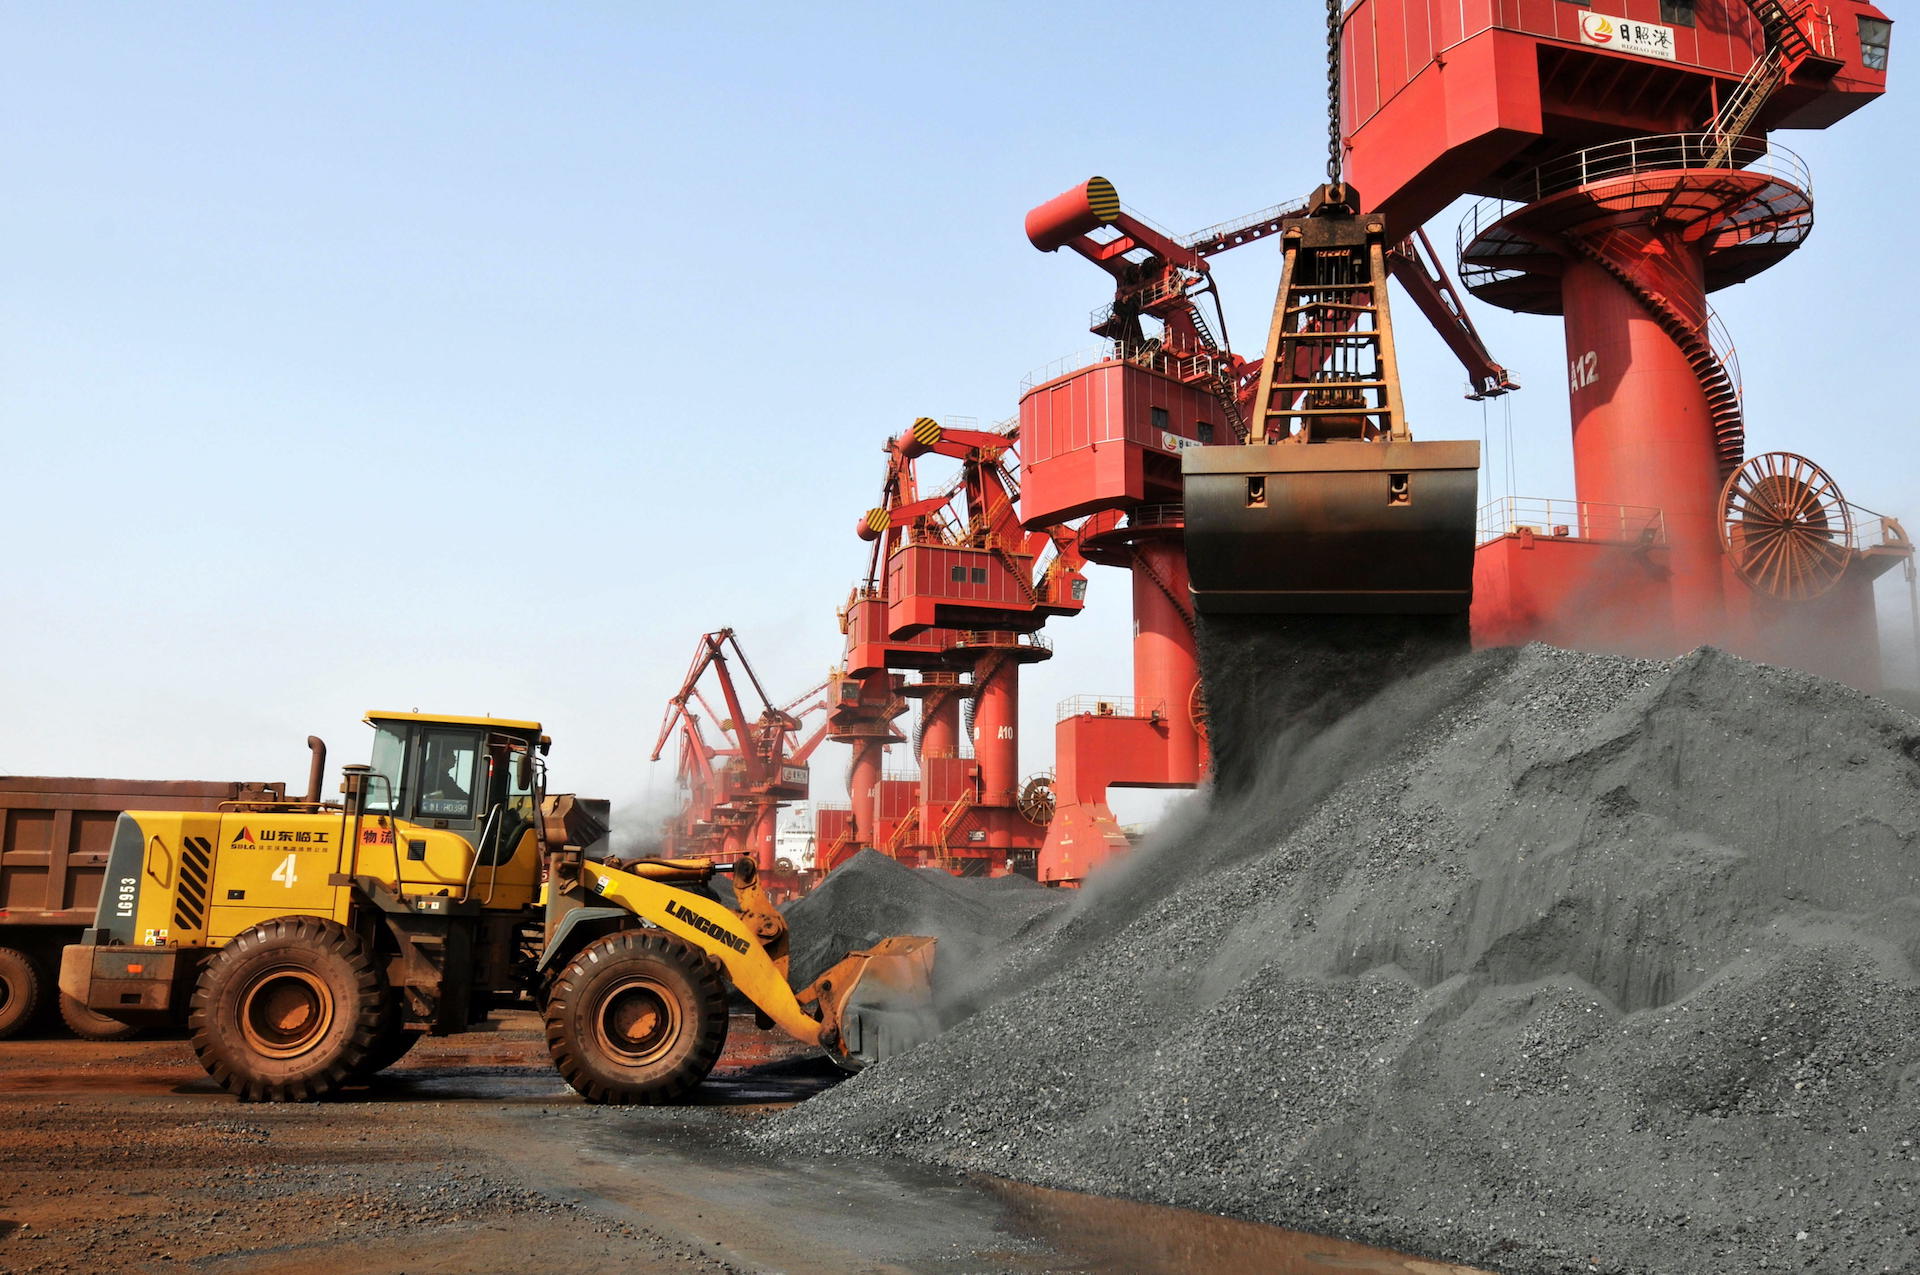 Iron ore imported from Peru is loaded onto trucks in China